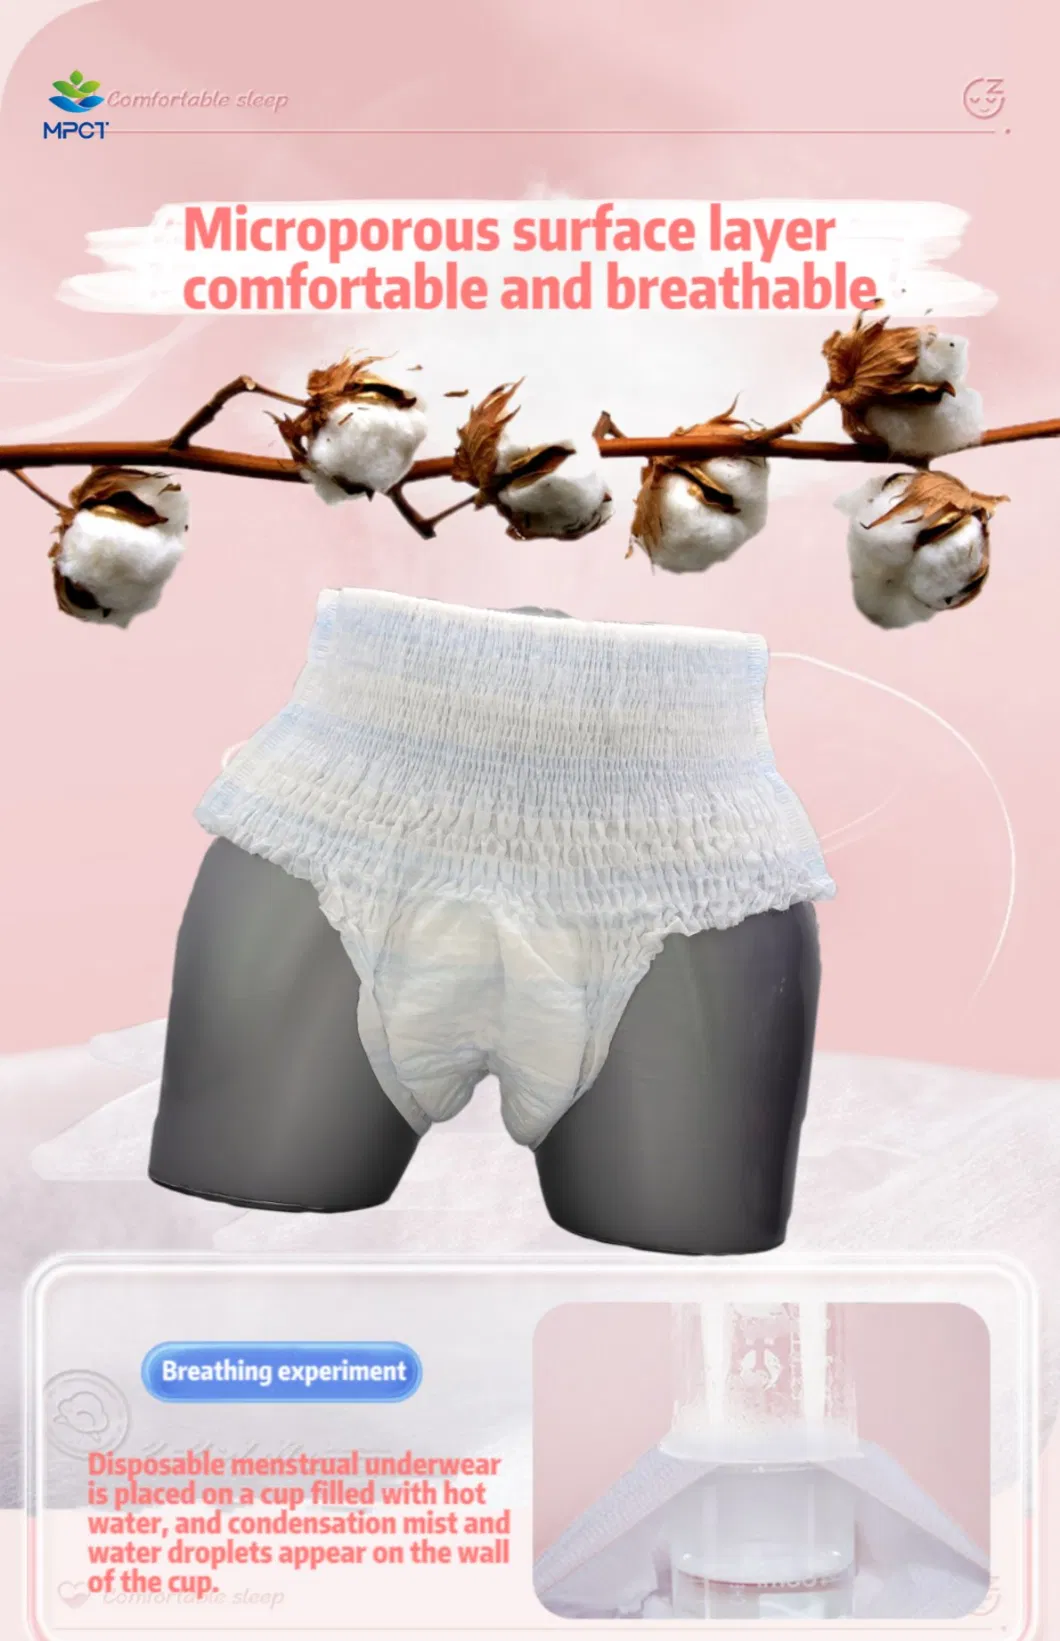 Japanese Sap Nappy Hospital Pant Type Brief Adult Baby Pull up Diaper Disposable Women Wearing in Bulk